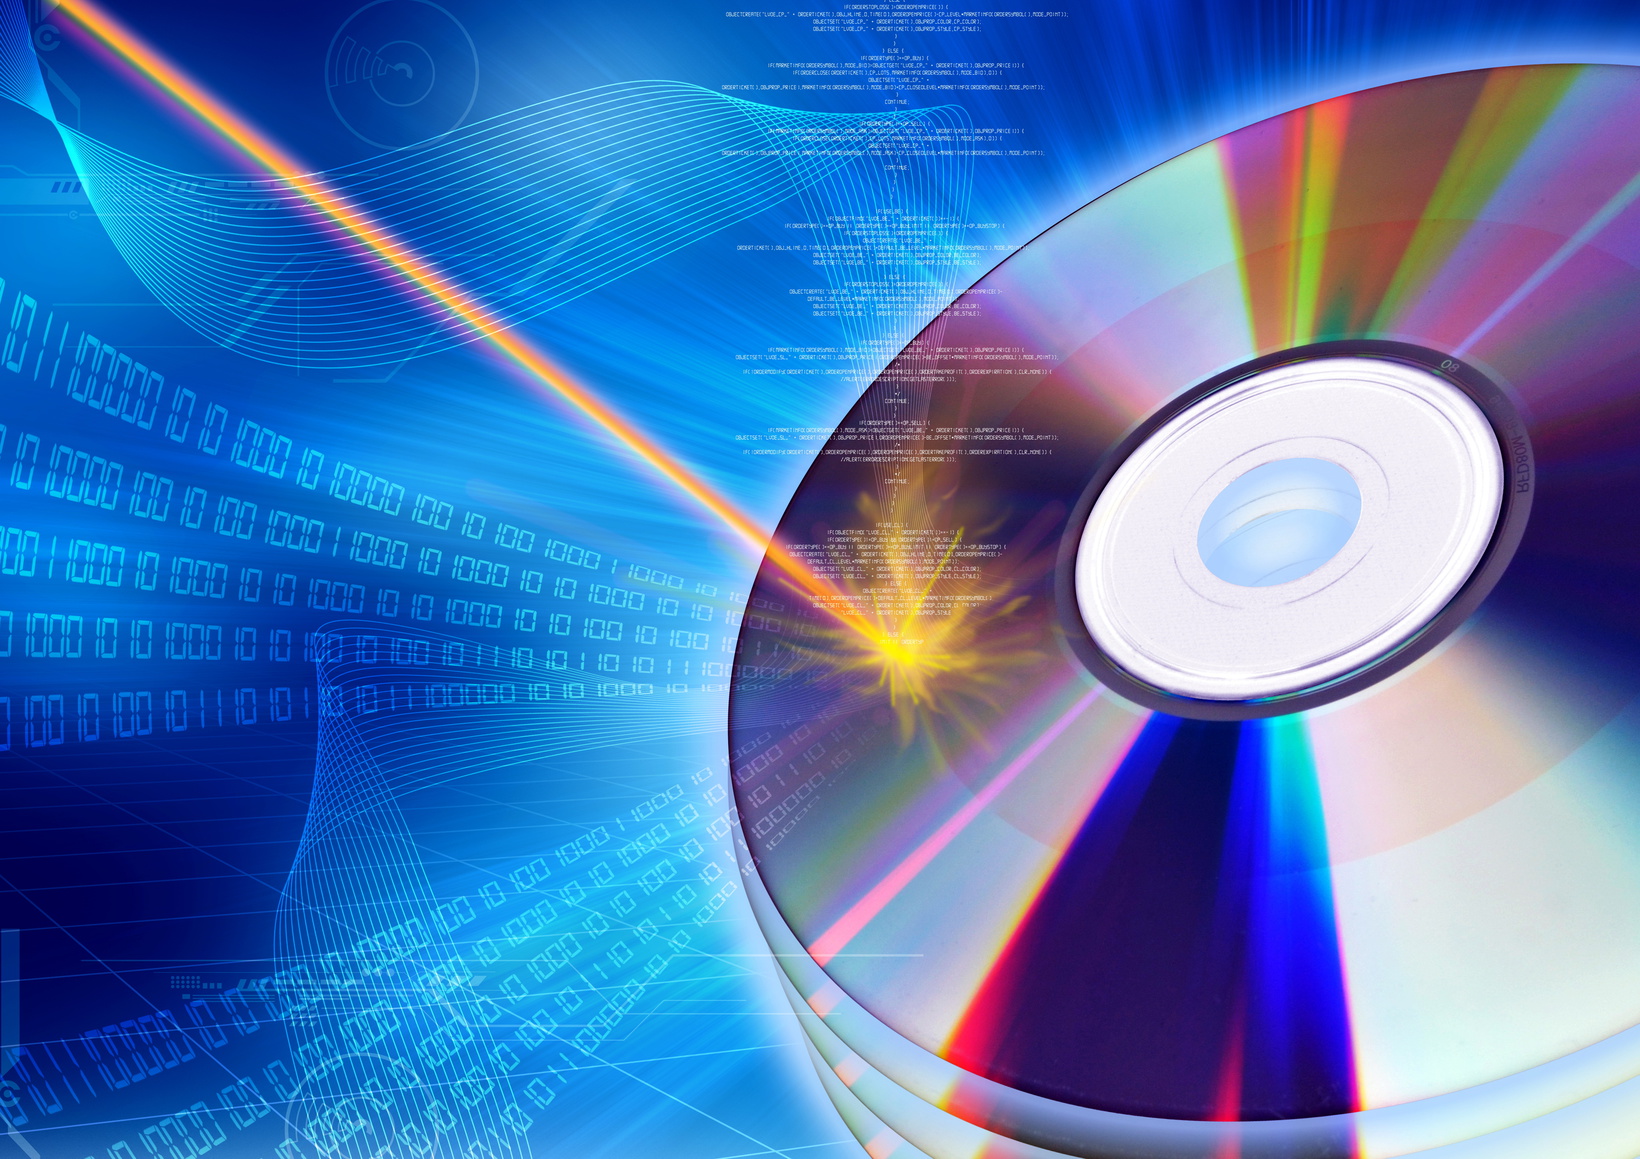 The concept of inserting digital information with burning process into a CD or DVD